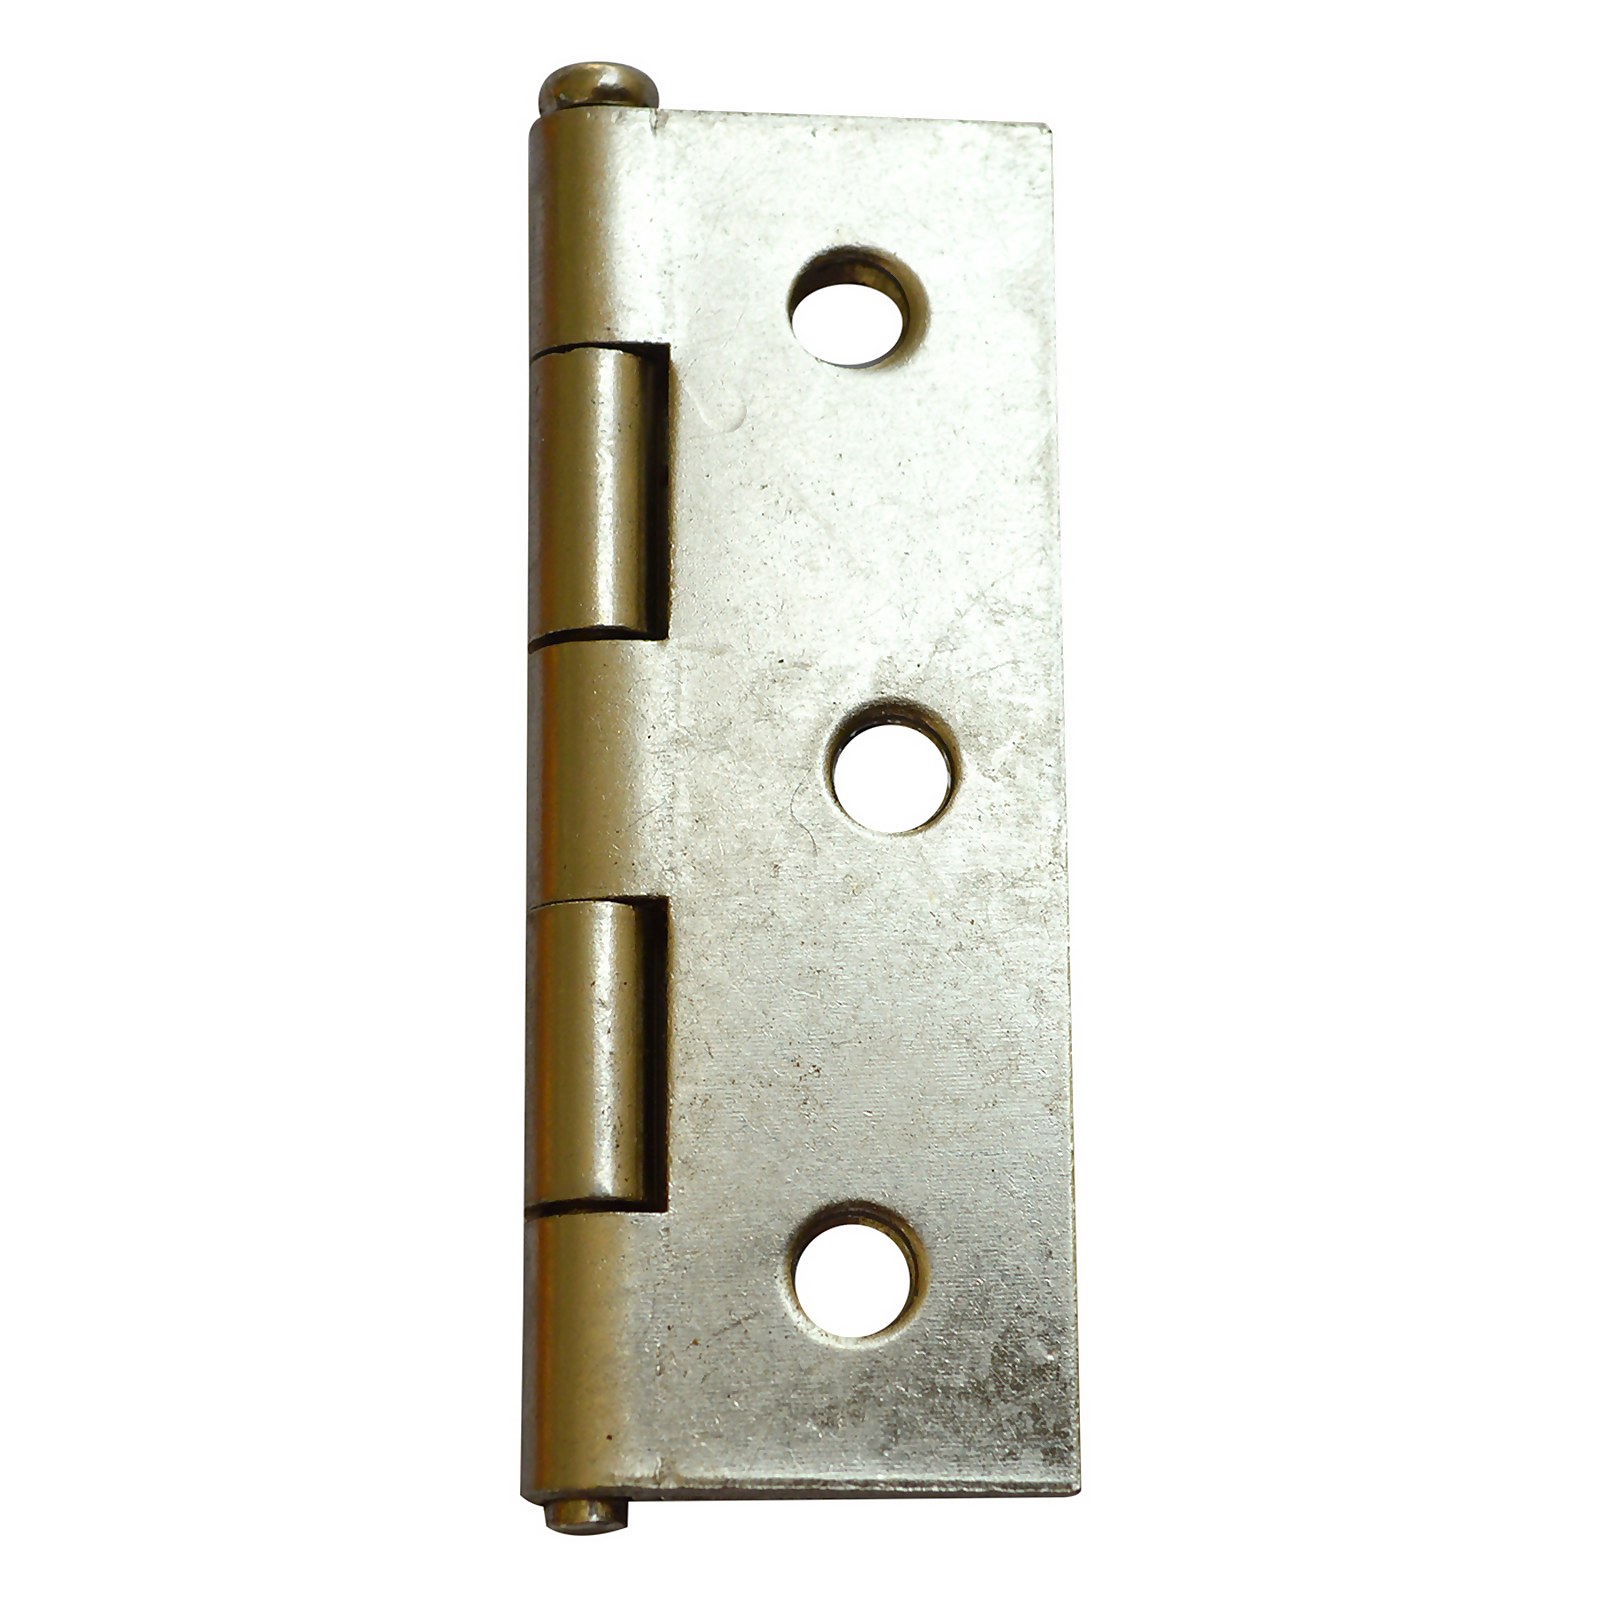 Photo of Butt Hinge Loose Pin 76mm - 2 Pack